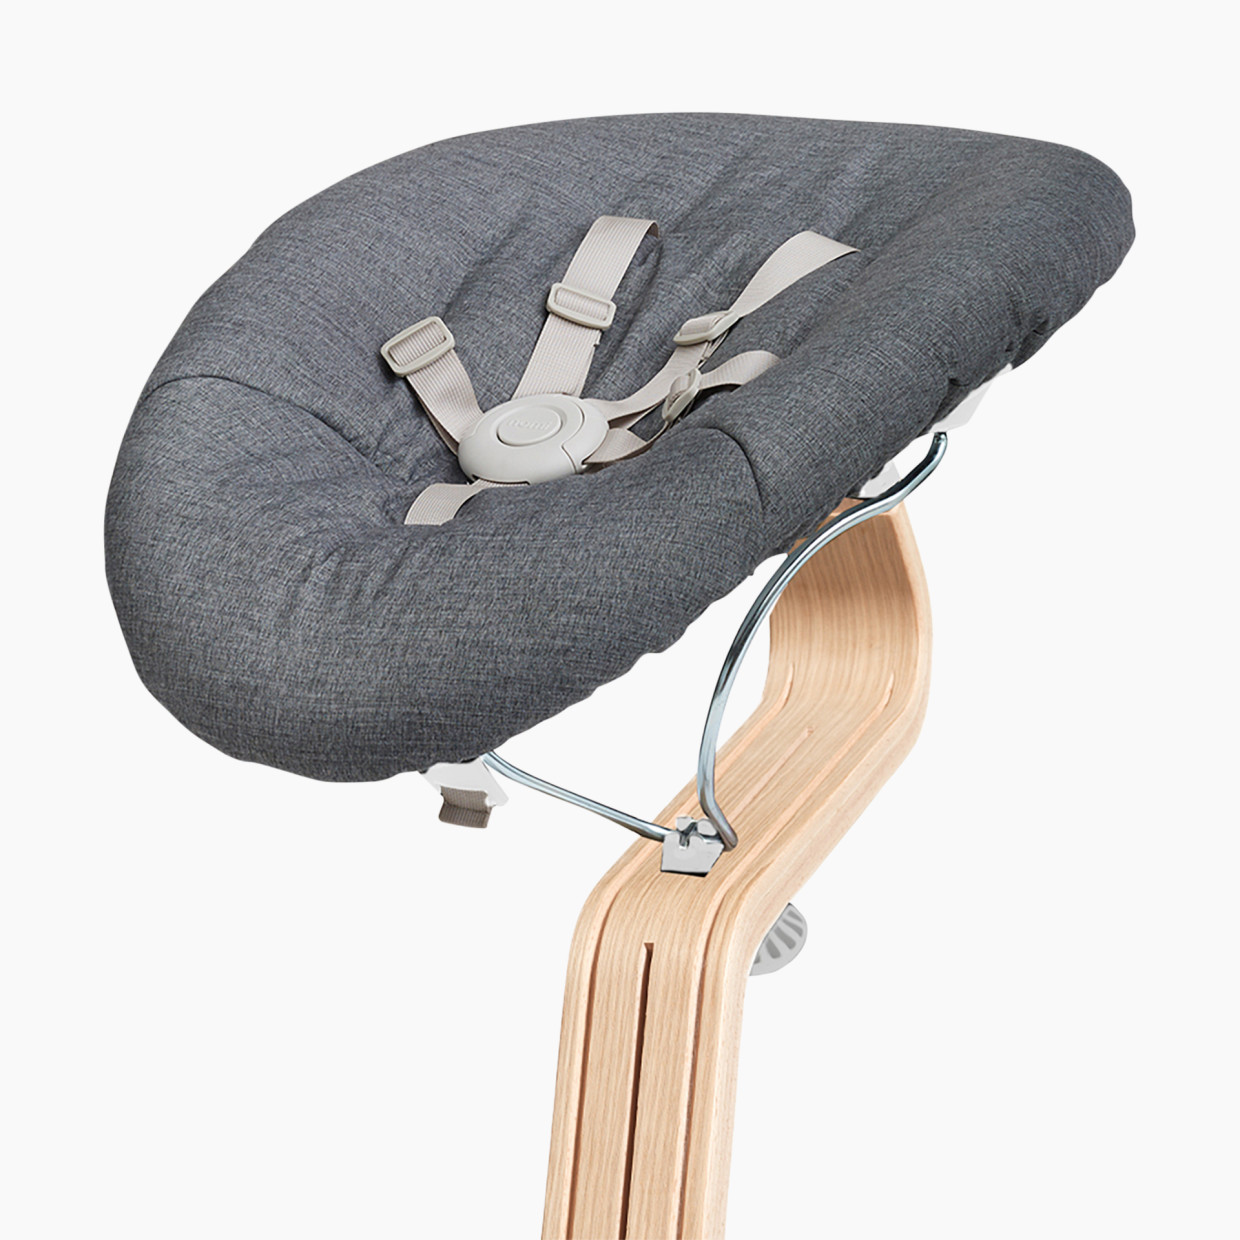 Nomi Nomi Baby Bouncer Attachment - White With Gray Cushion.